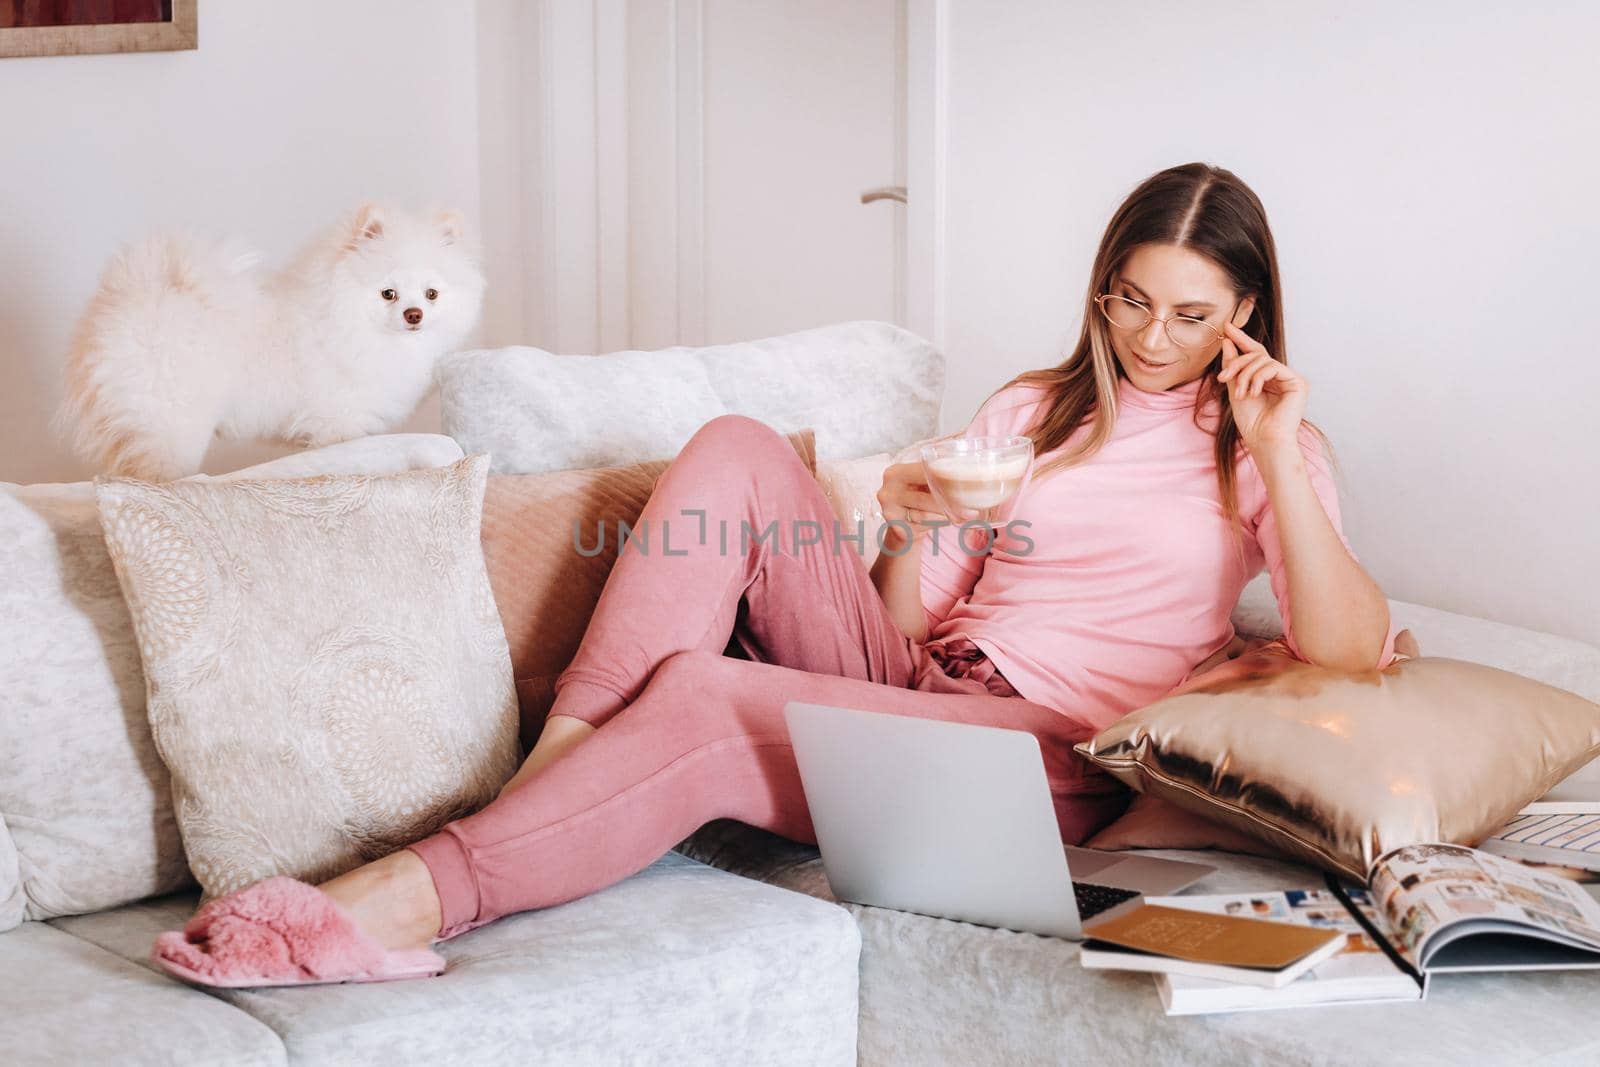 a girl in pajamas at home is working on a laptop with her dog Spitzer, the dog and its owner are resting on the couch and watching the laptop.Household chores.